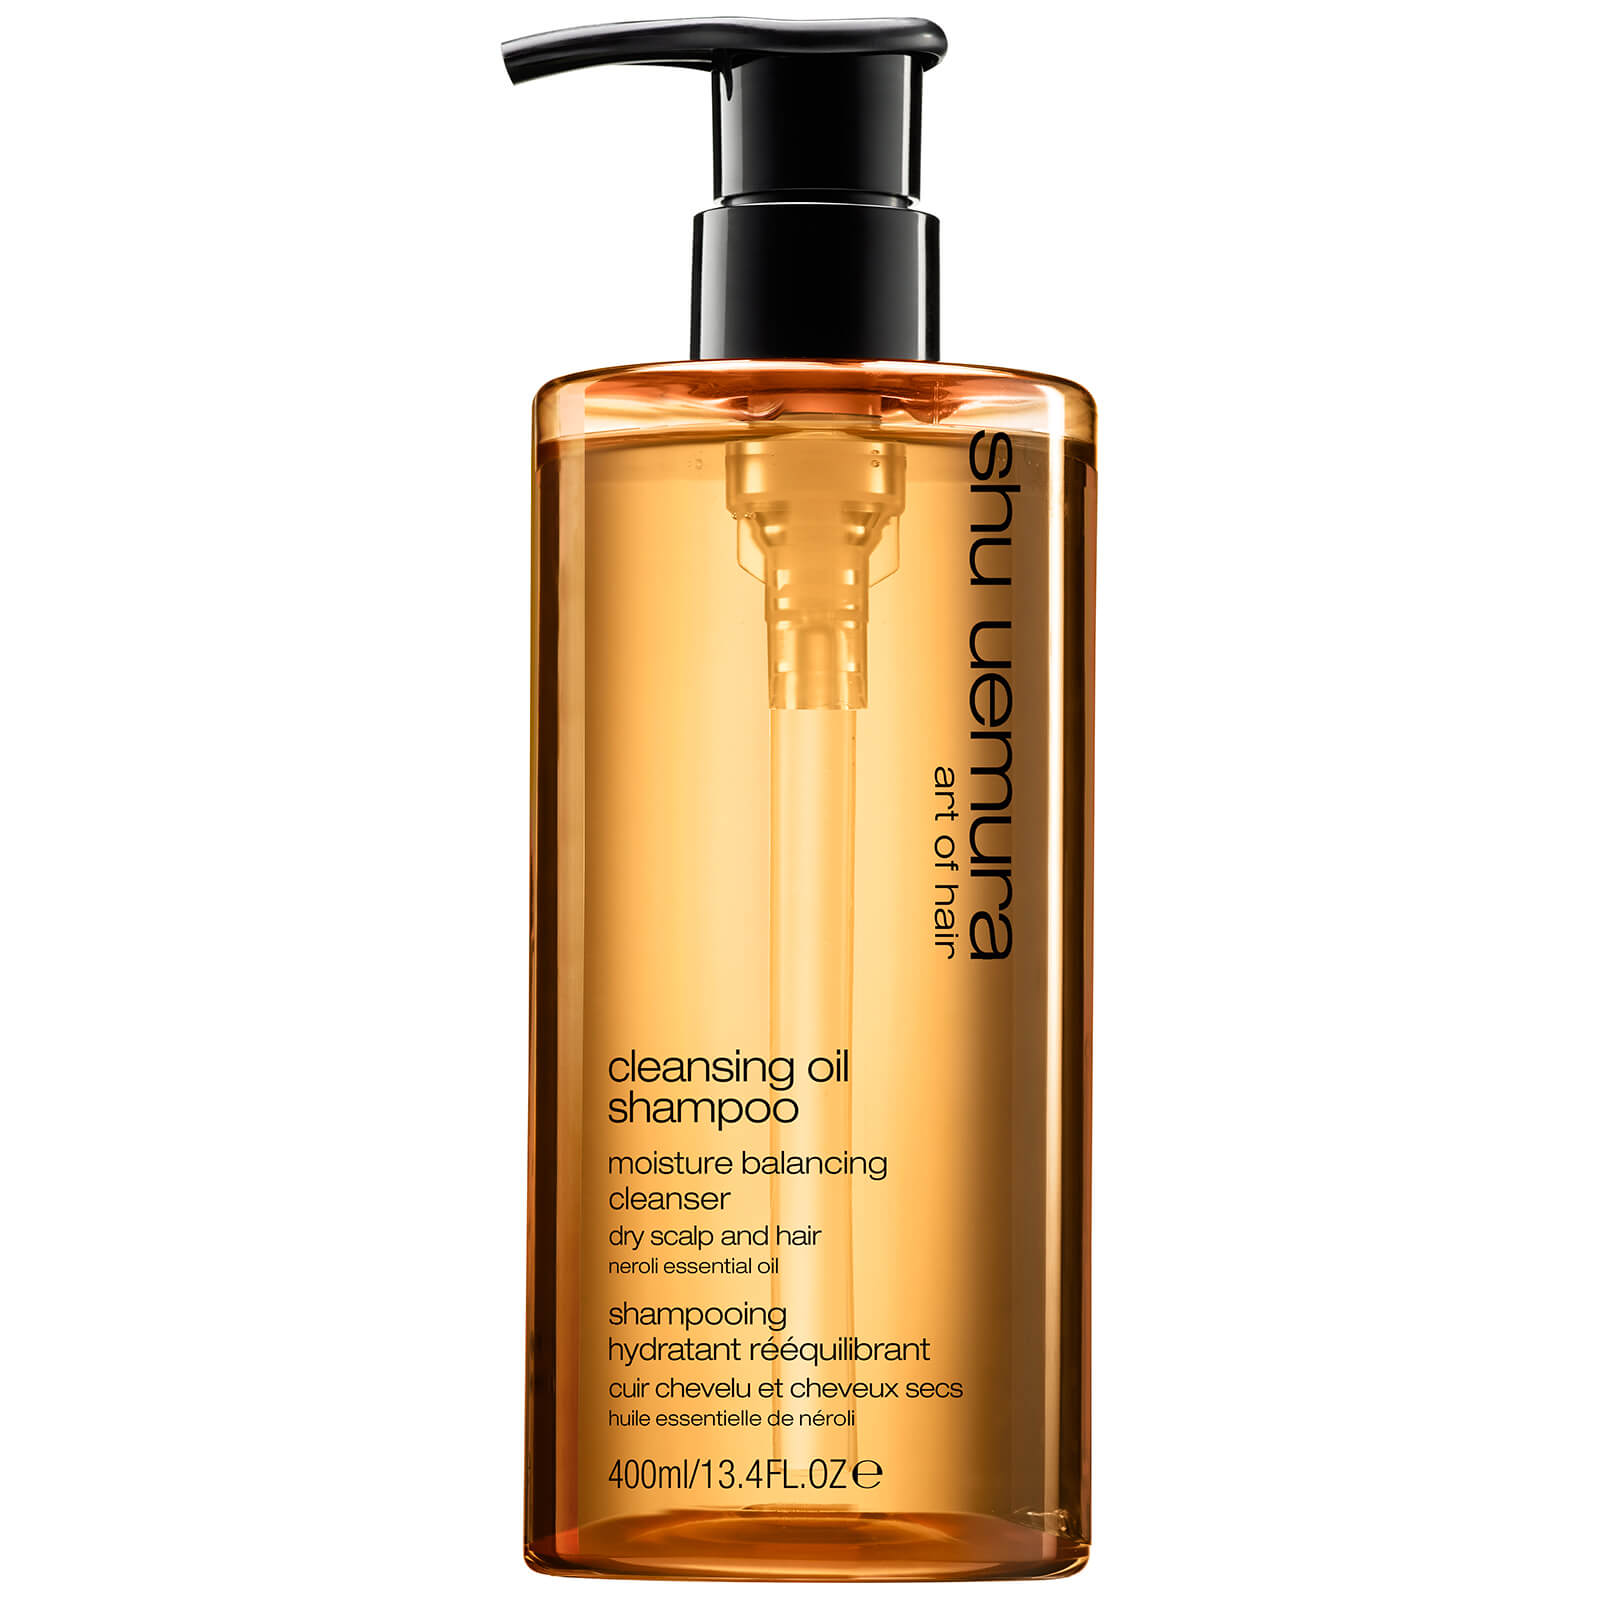 Shampooing hydratant rééquilibrant Cleansing Oil